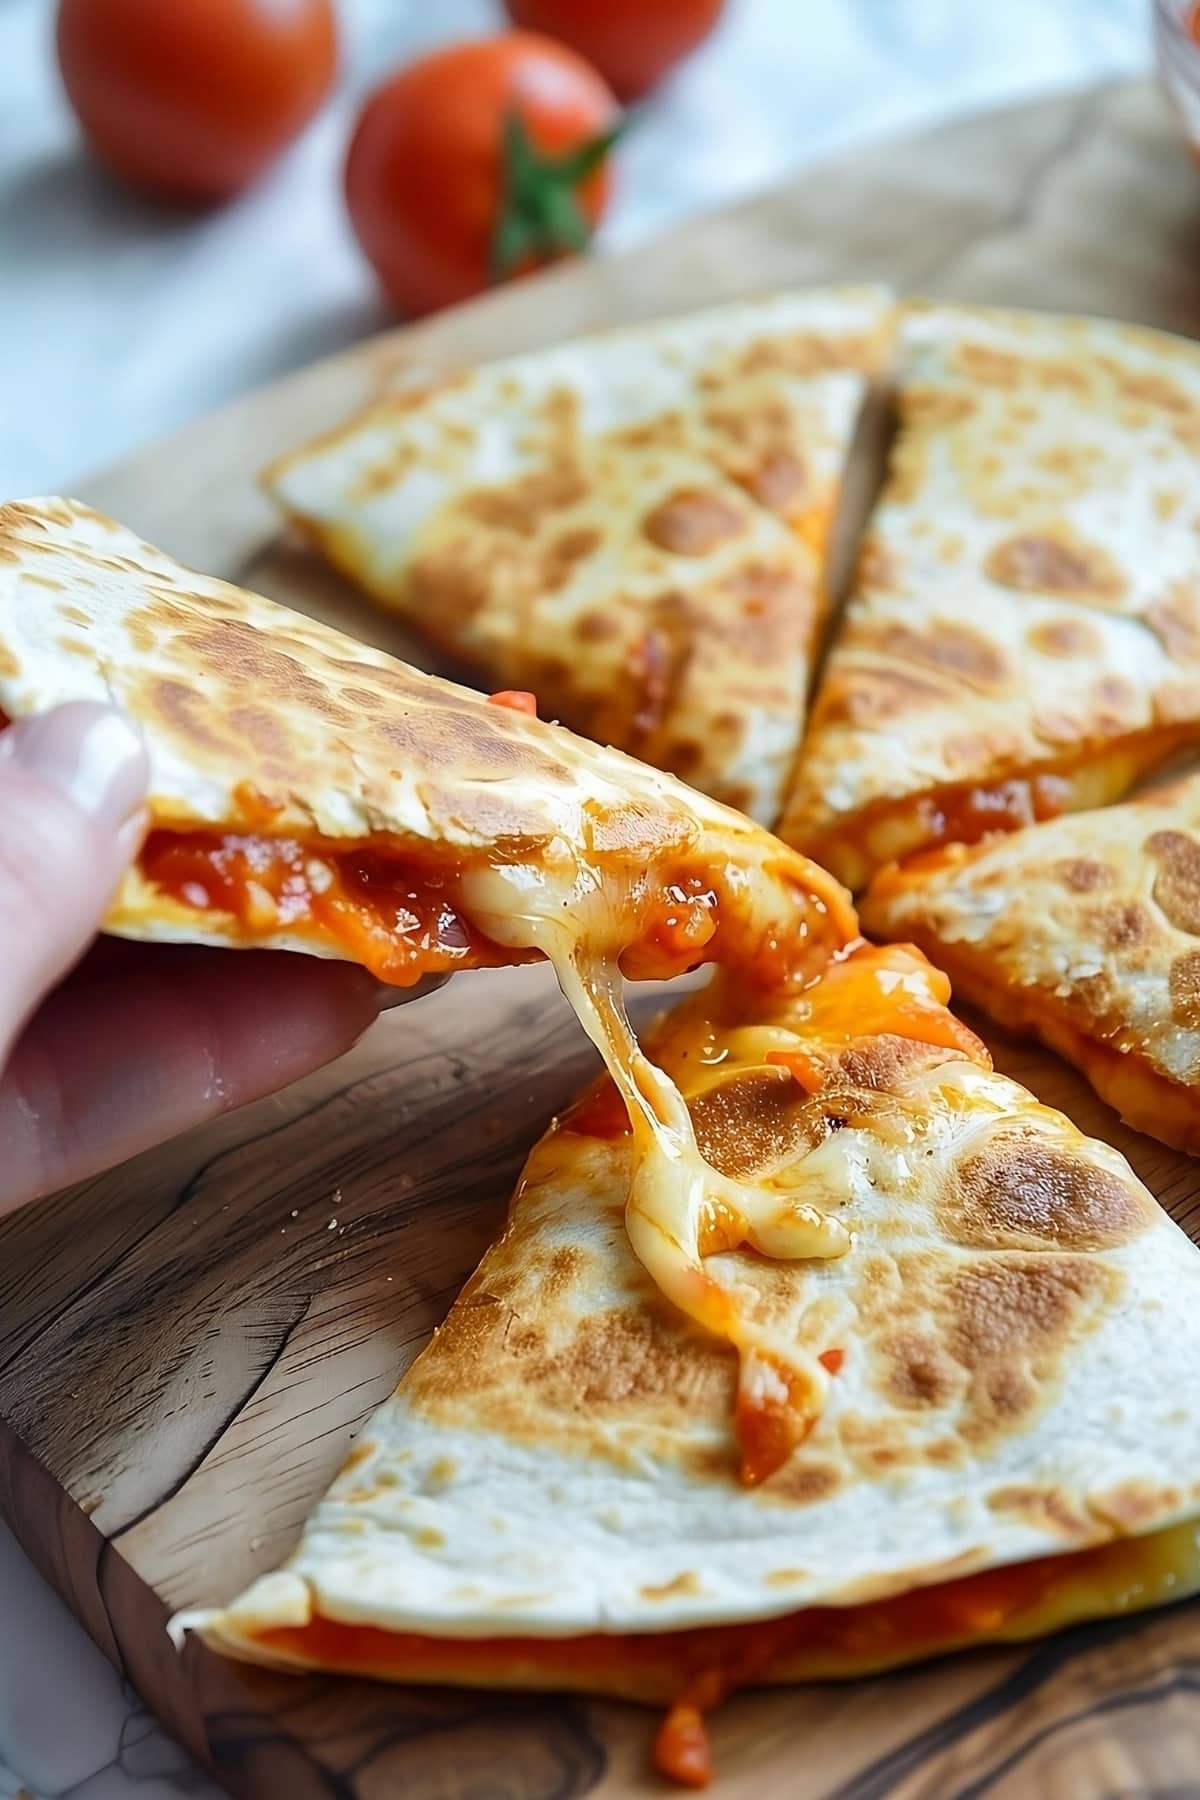 Hand lifting a slice of cheesy pizza quesadilla in a wooden board.